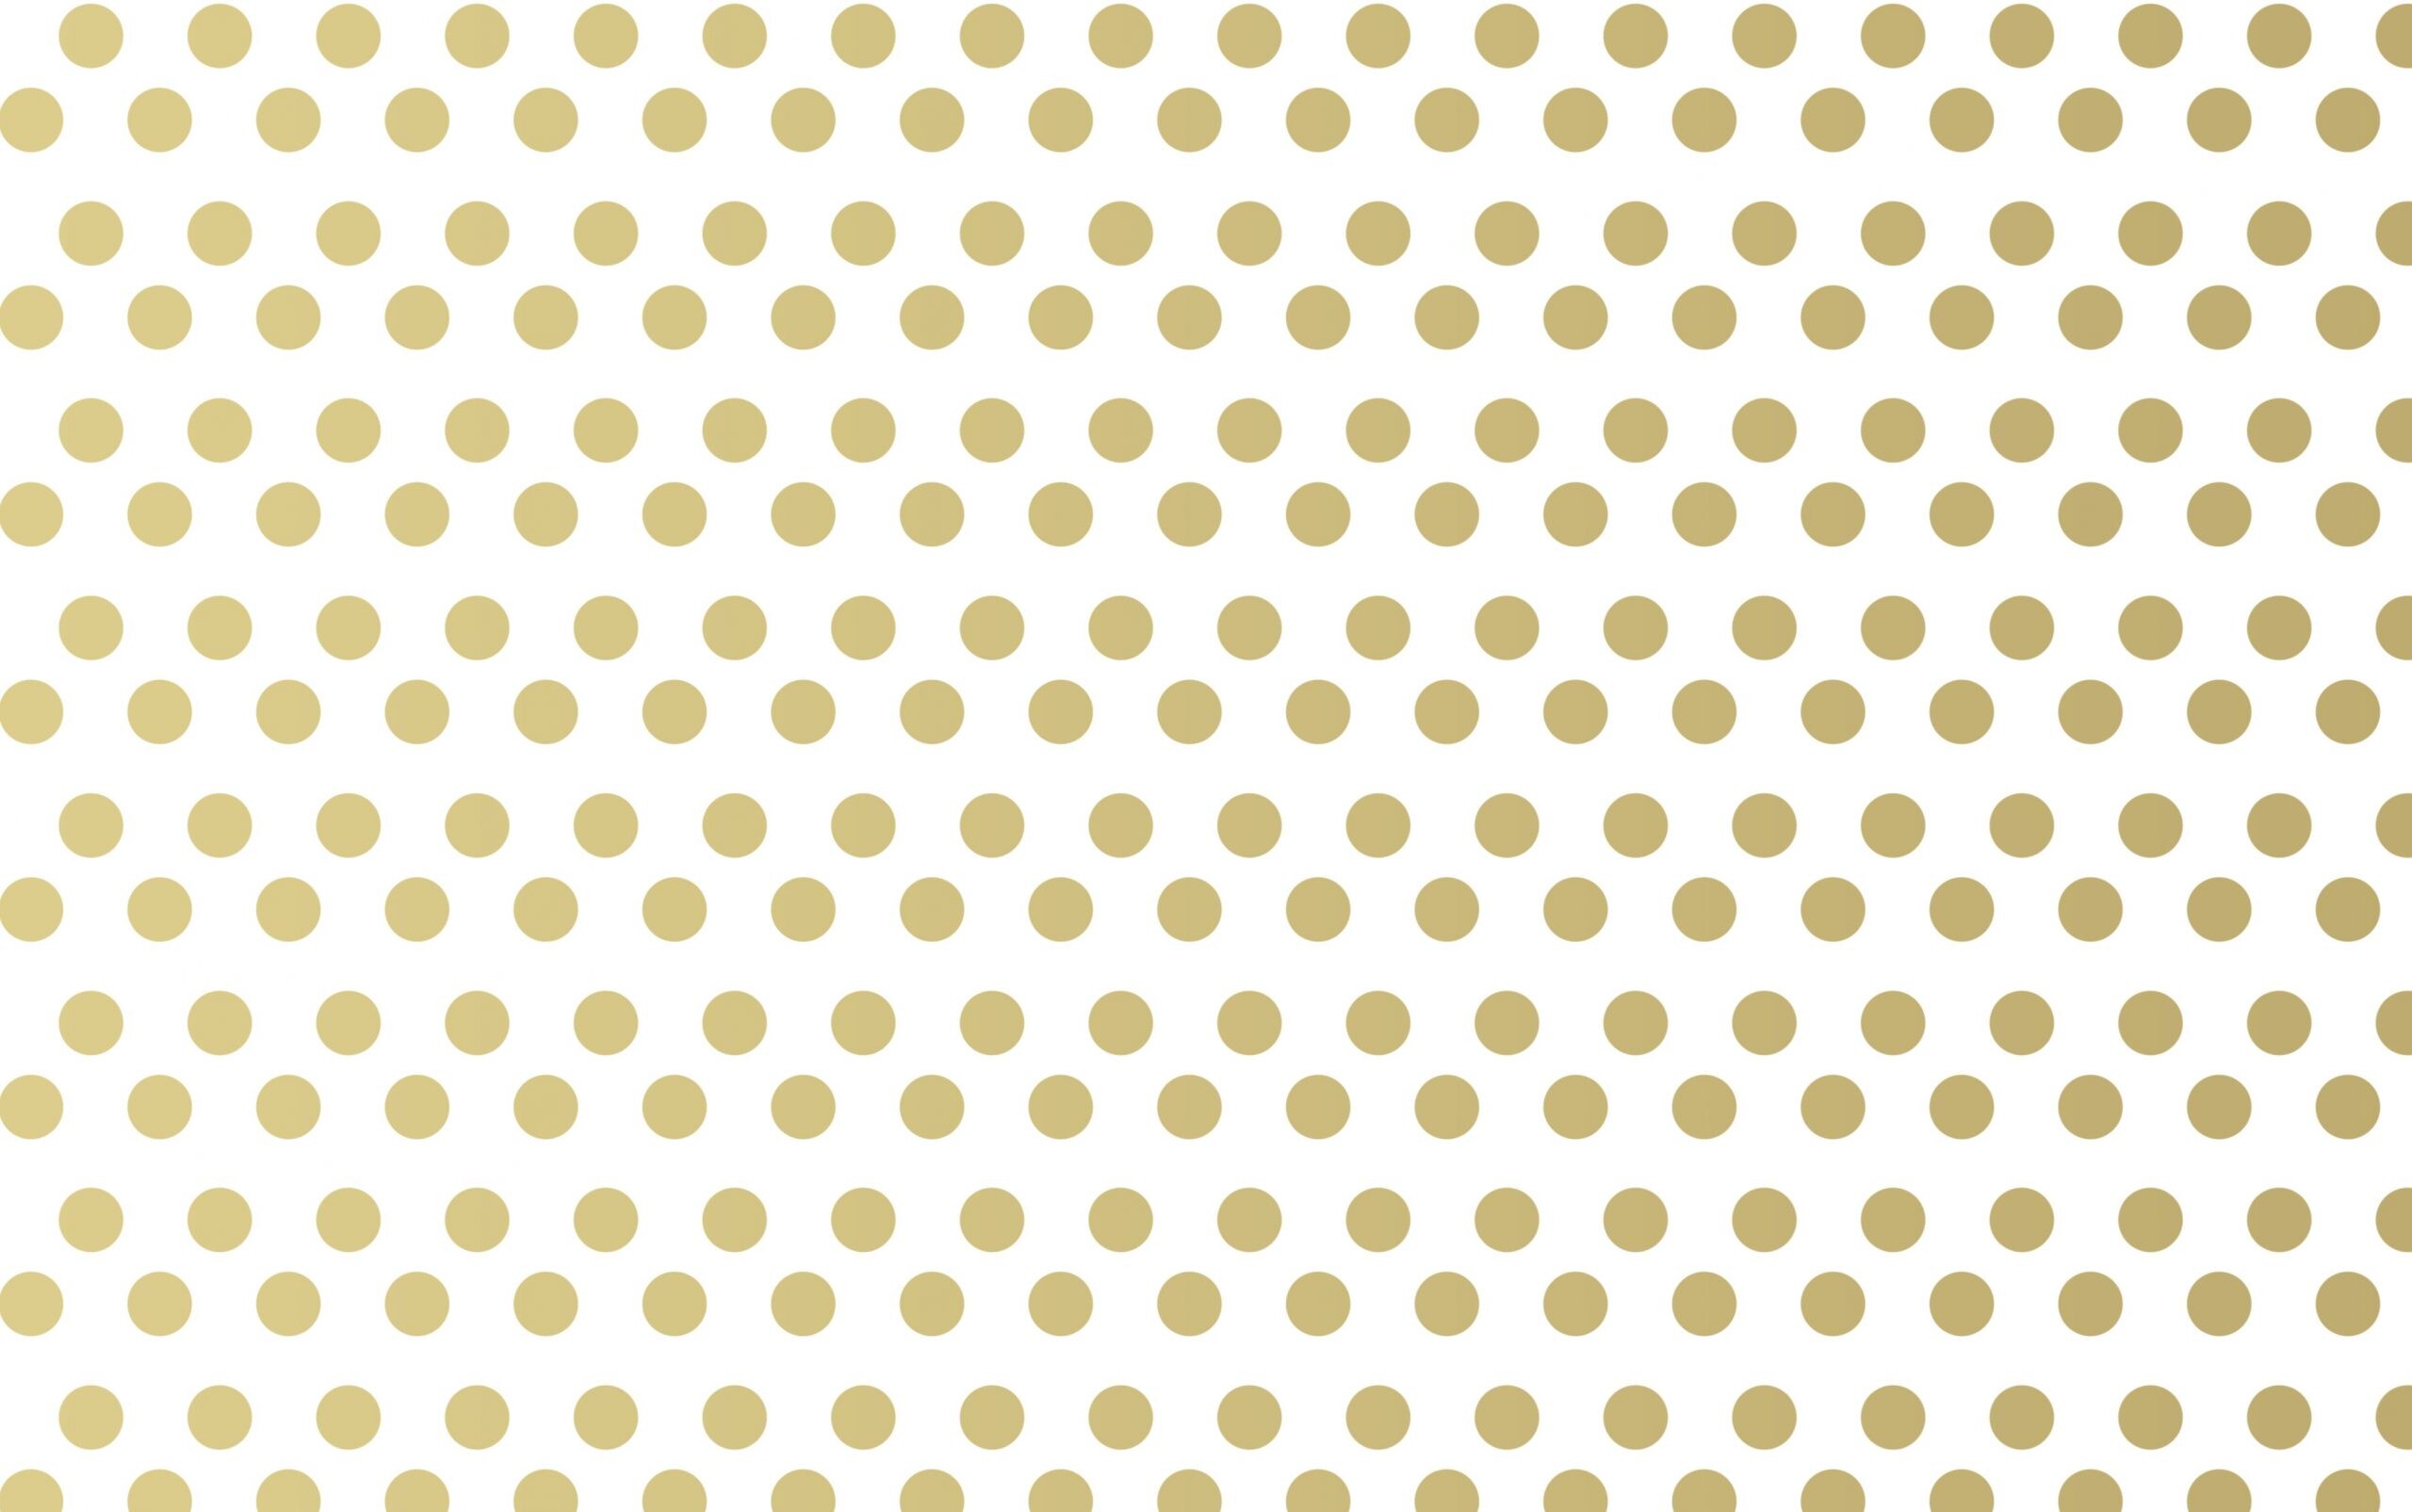 Gold Dots: Polka dot motif, A pattern made up of numerous circles on a white background. 2560x1610 HD Wallpaper.